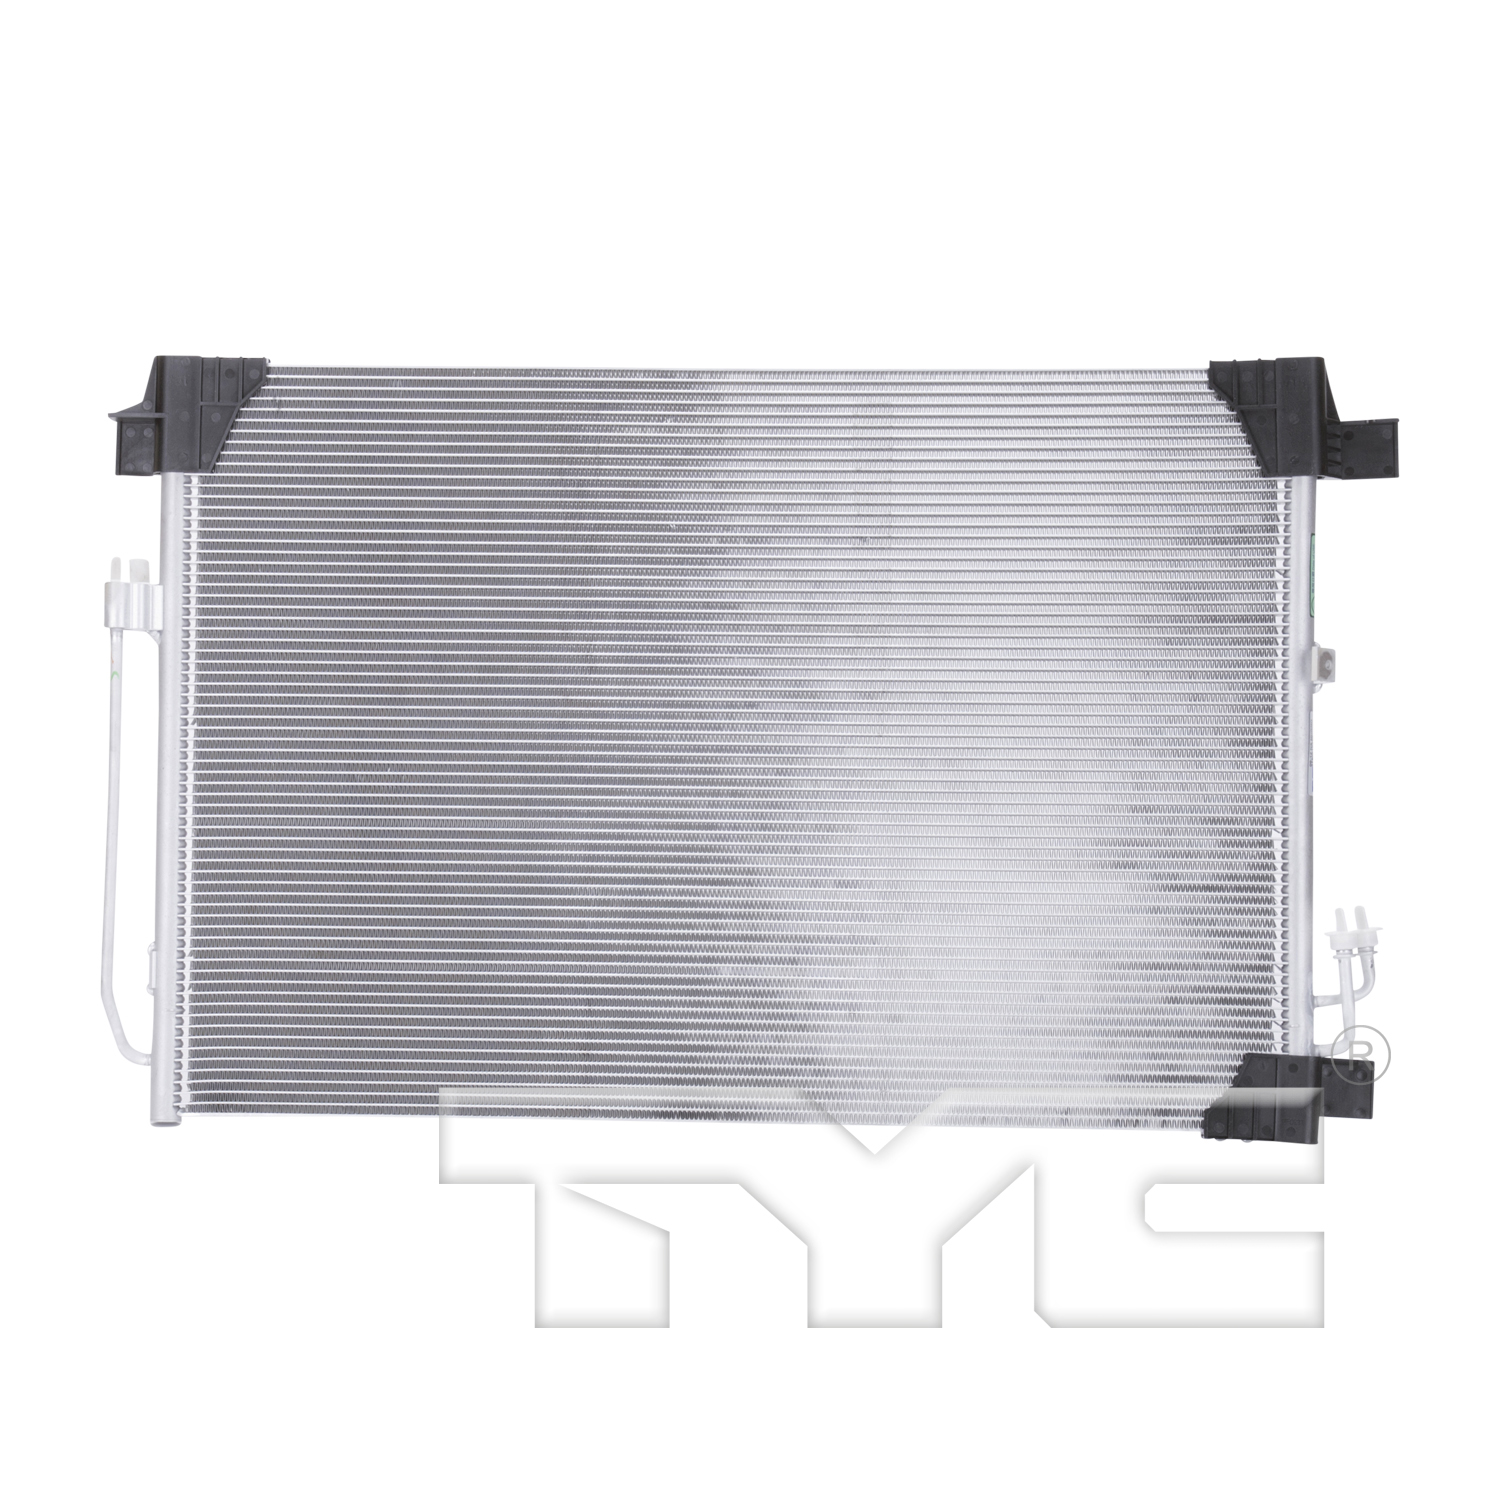 Aftermarket AC CONDENSERS for NISSAN - MURANO, MURANO,09-14,Air conditioning condenser